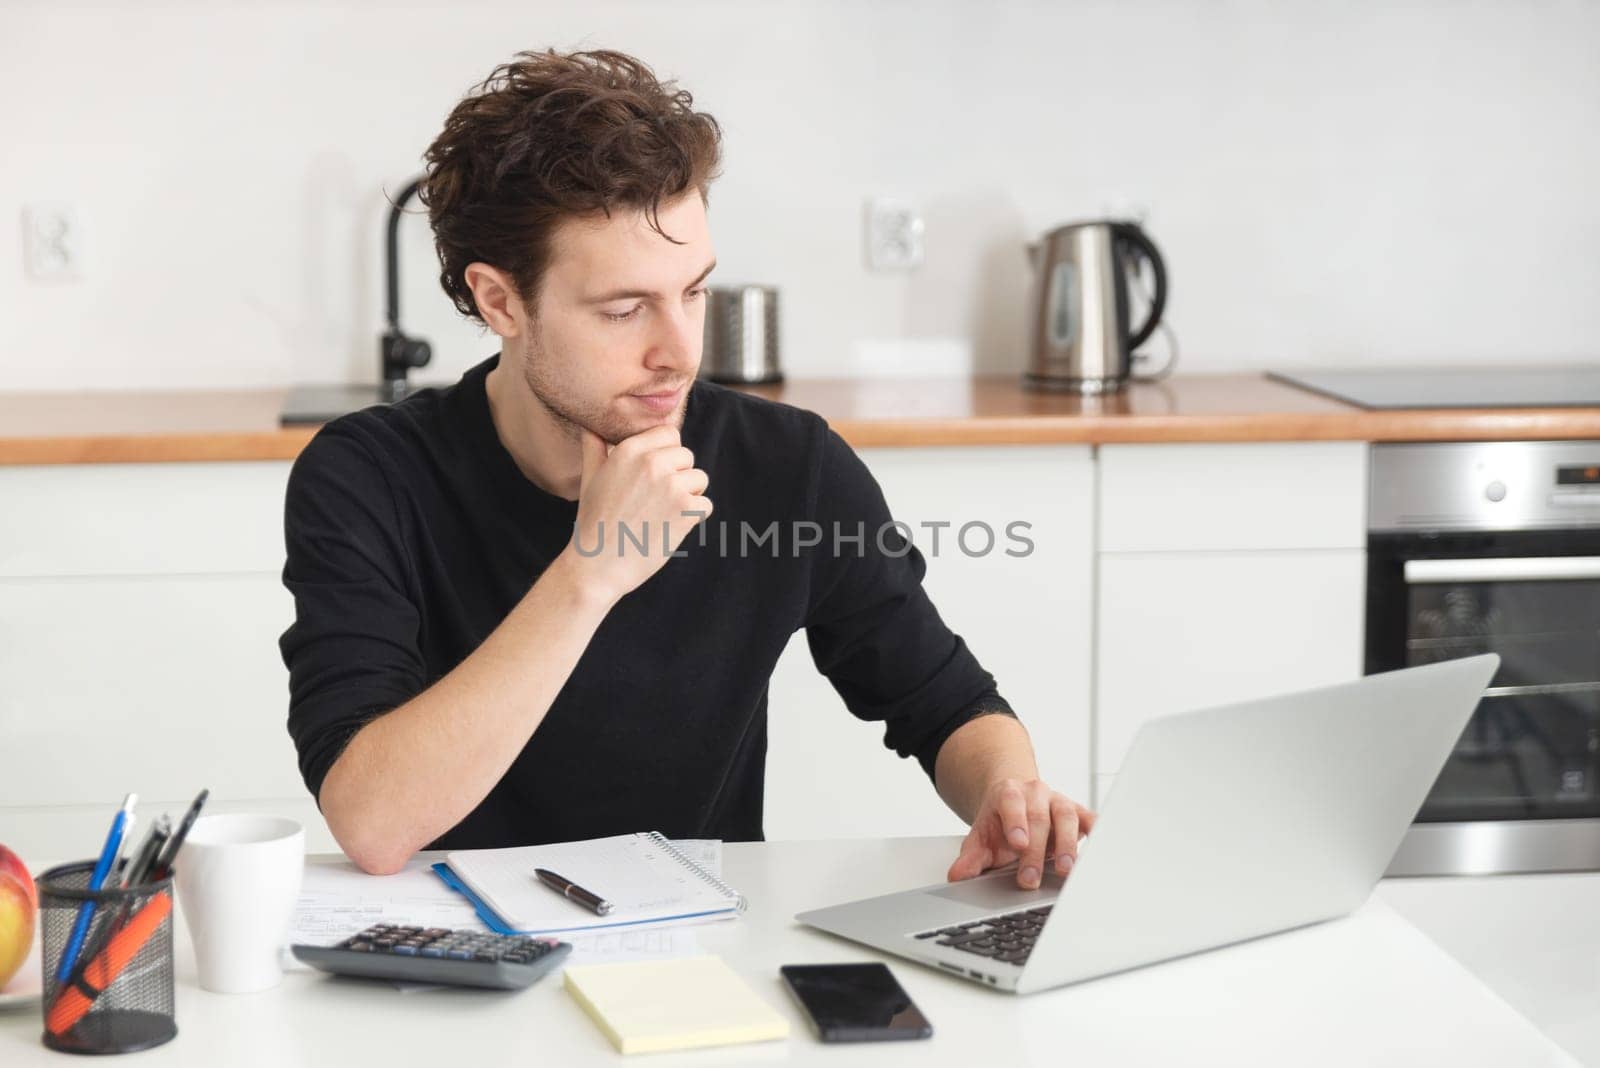 Man using laptop at home. Job search or remote work concept